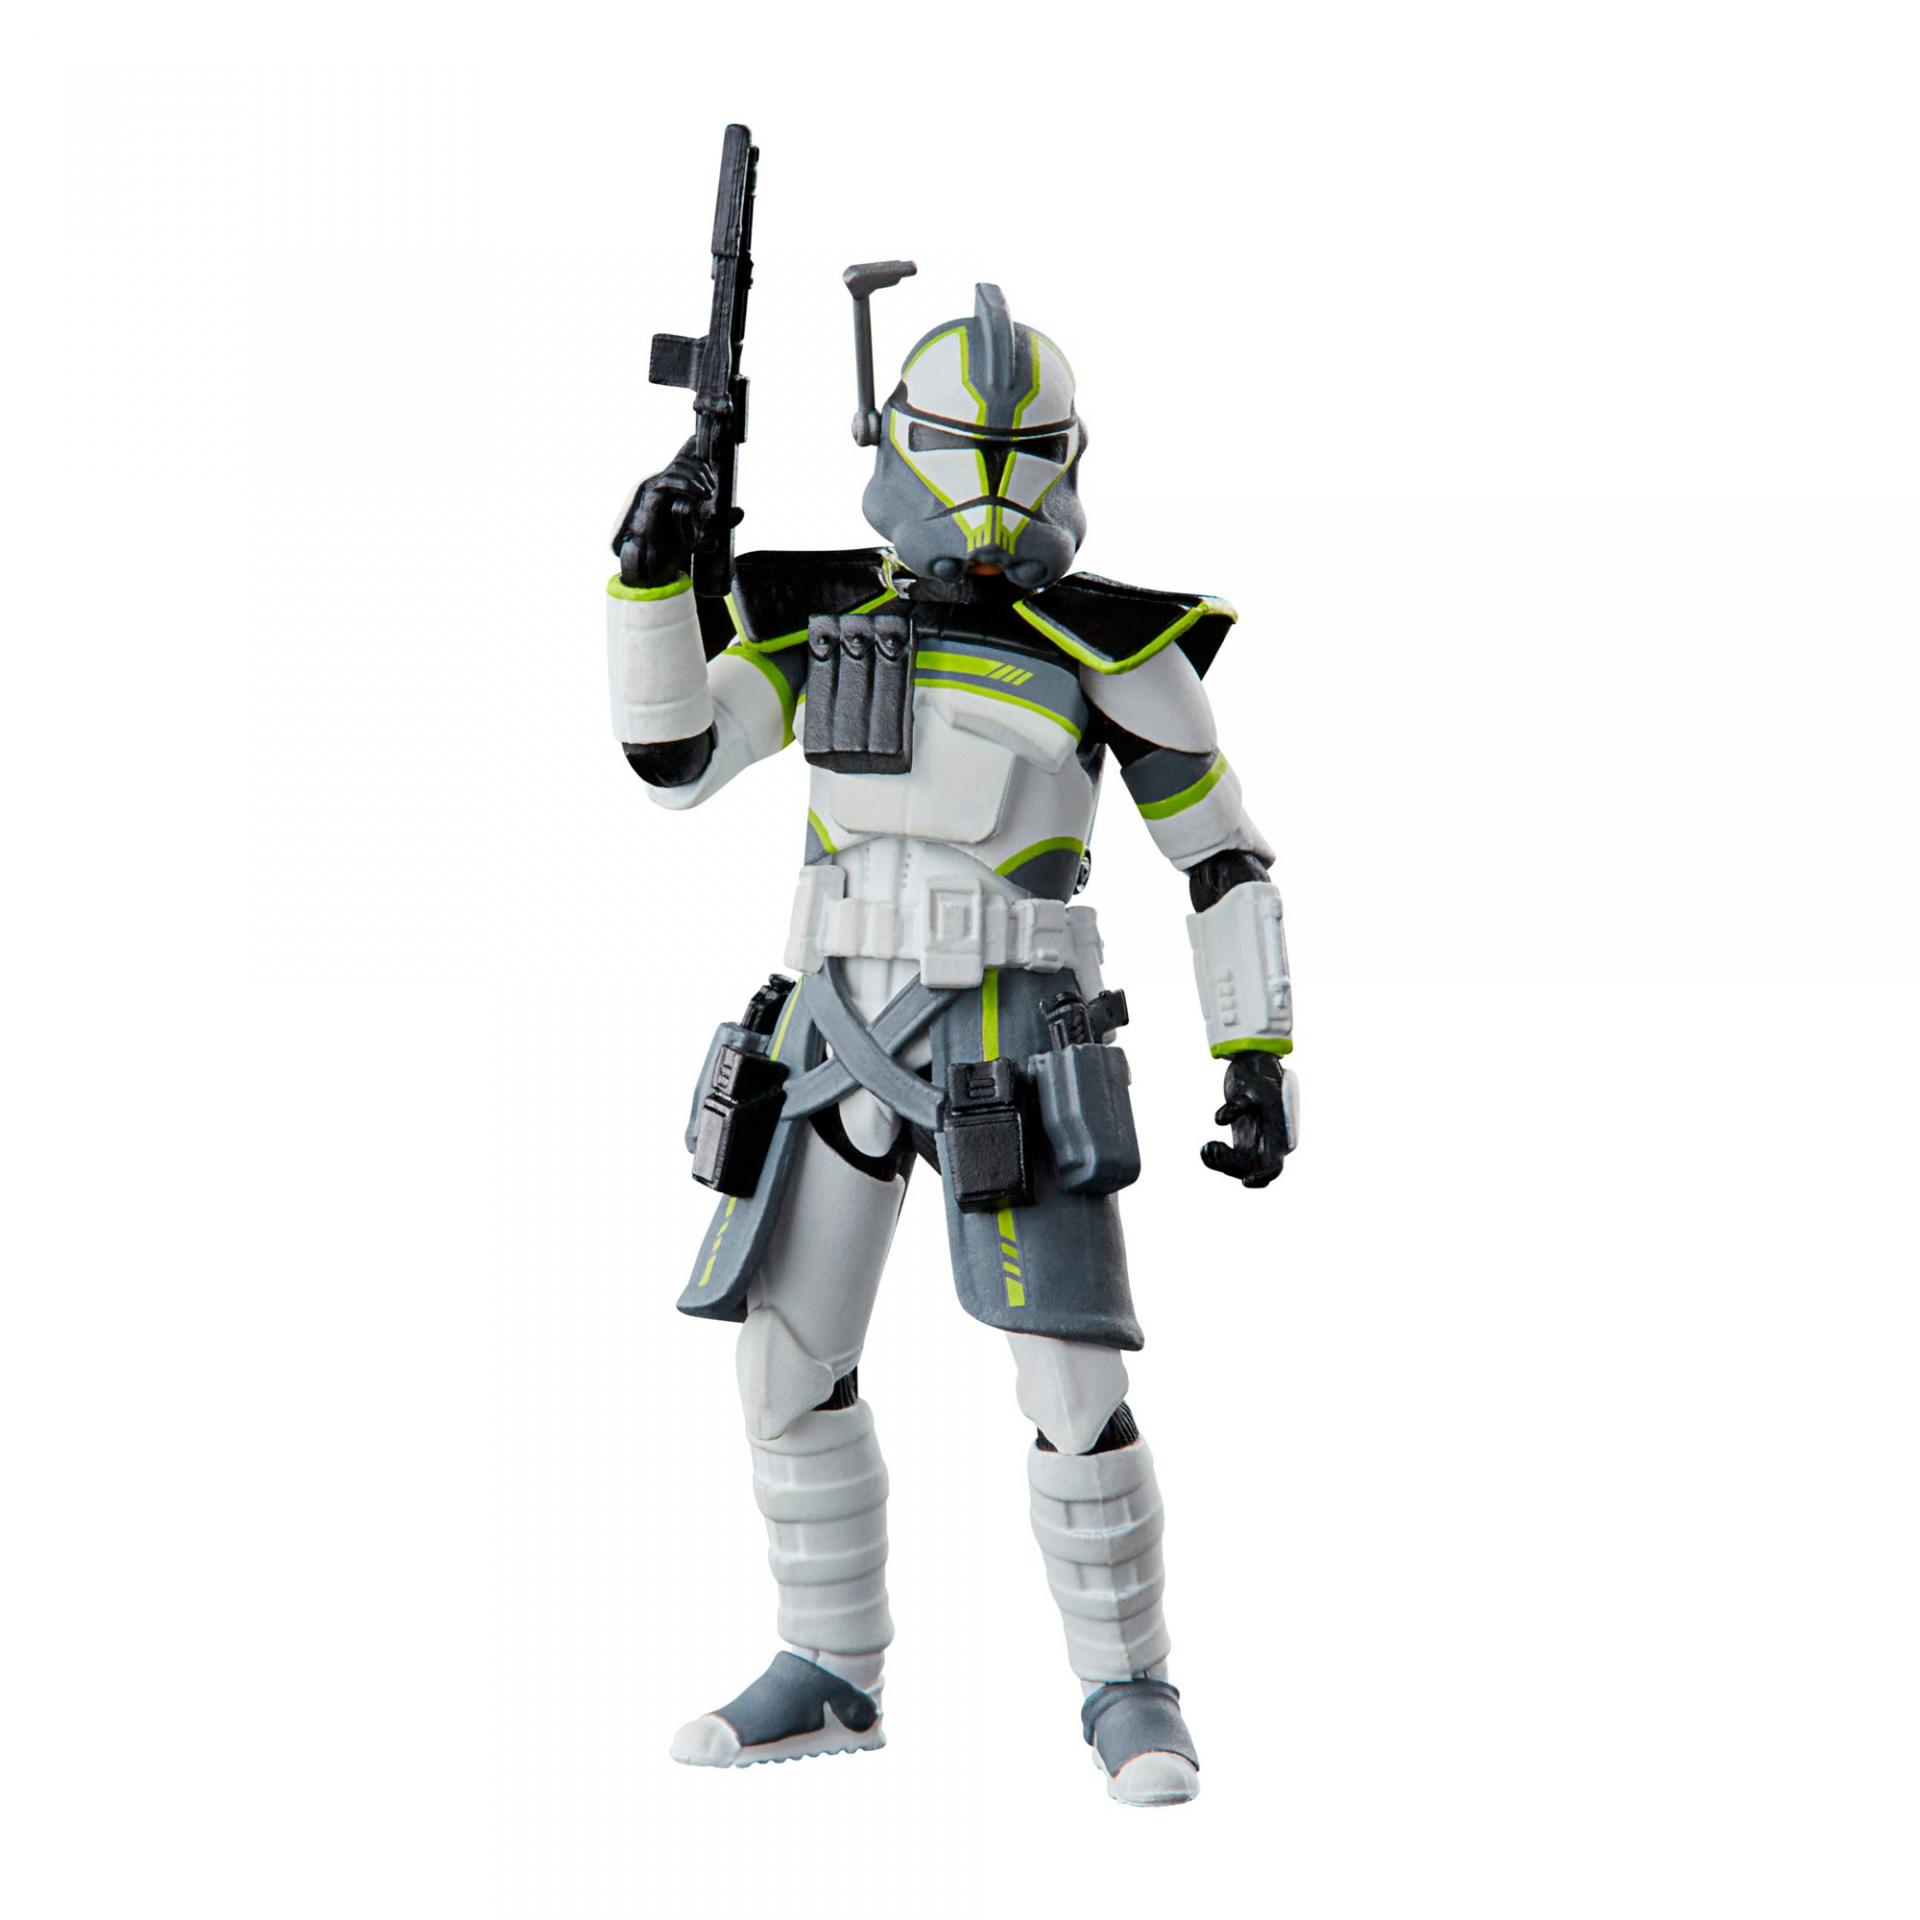 Star wars the vintage collection gaming greats arc trooper lambent seeker jawascave 11